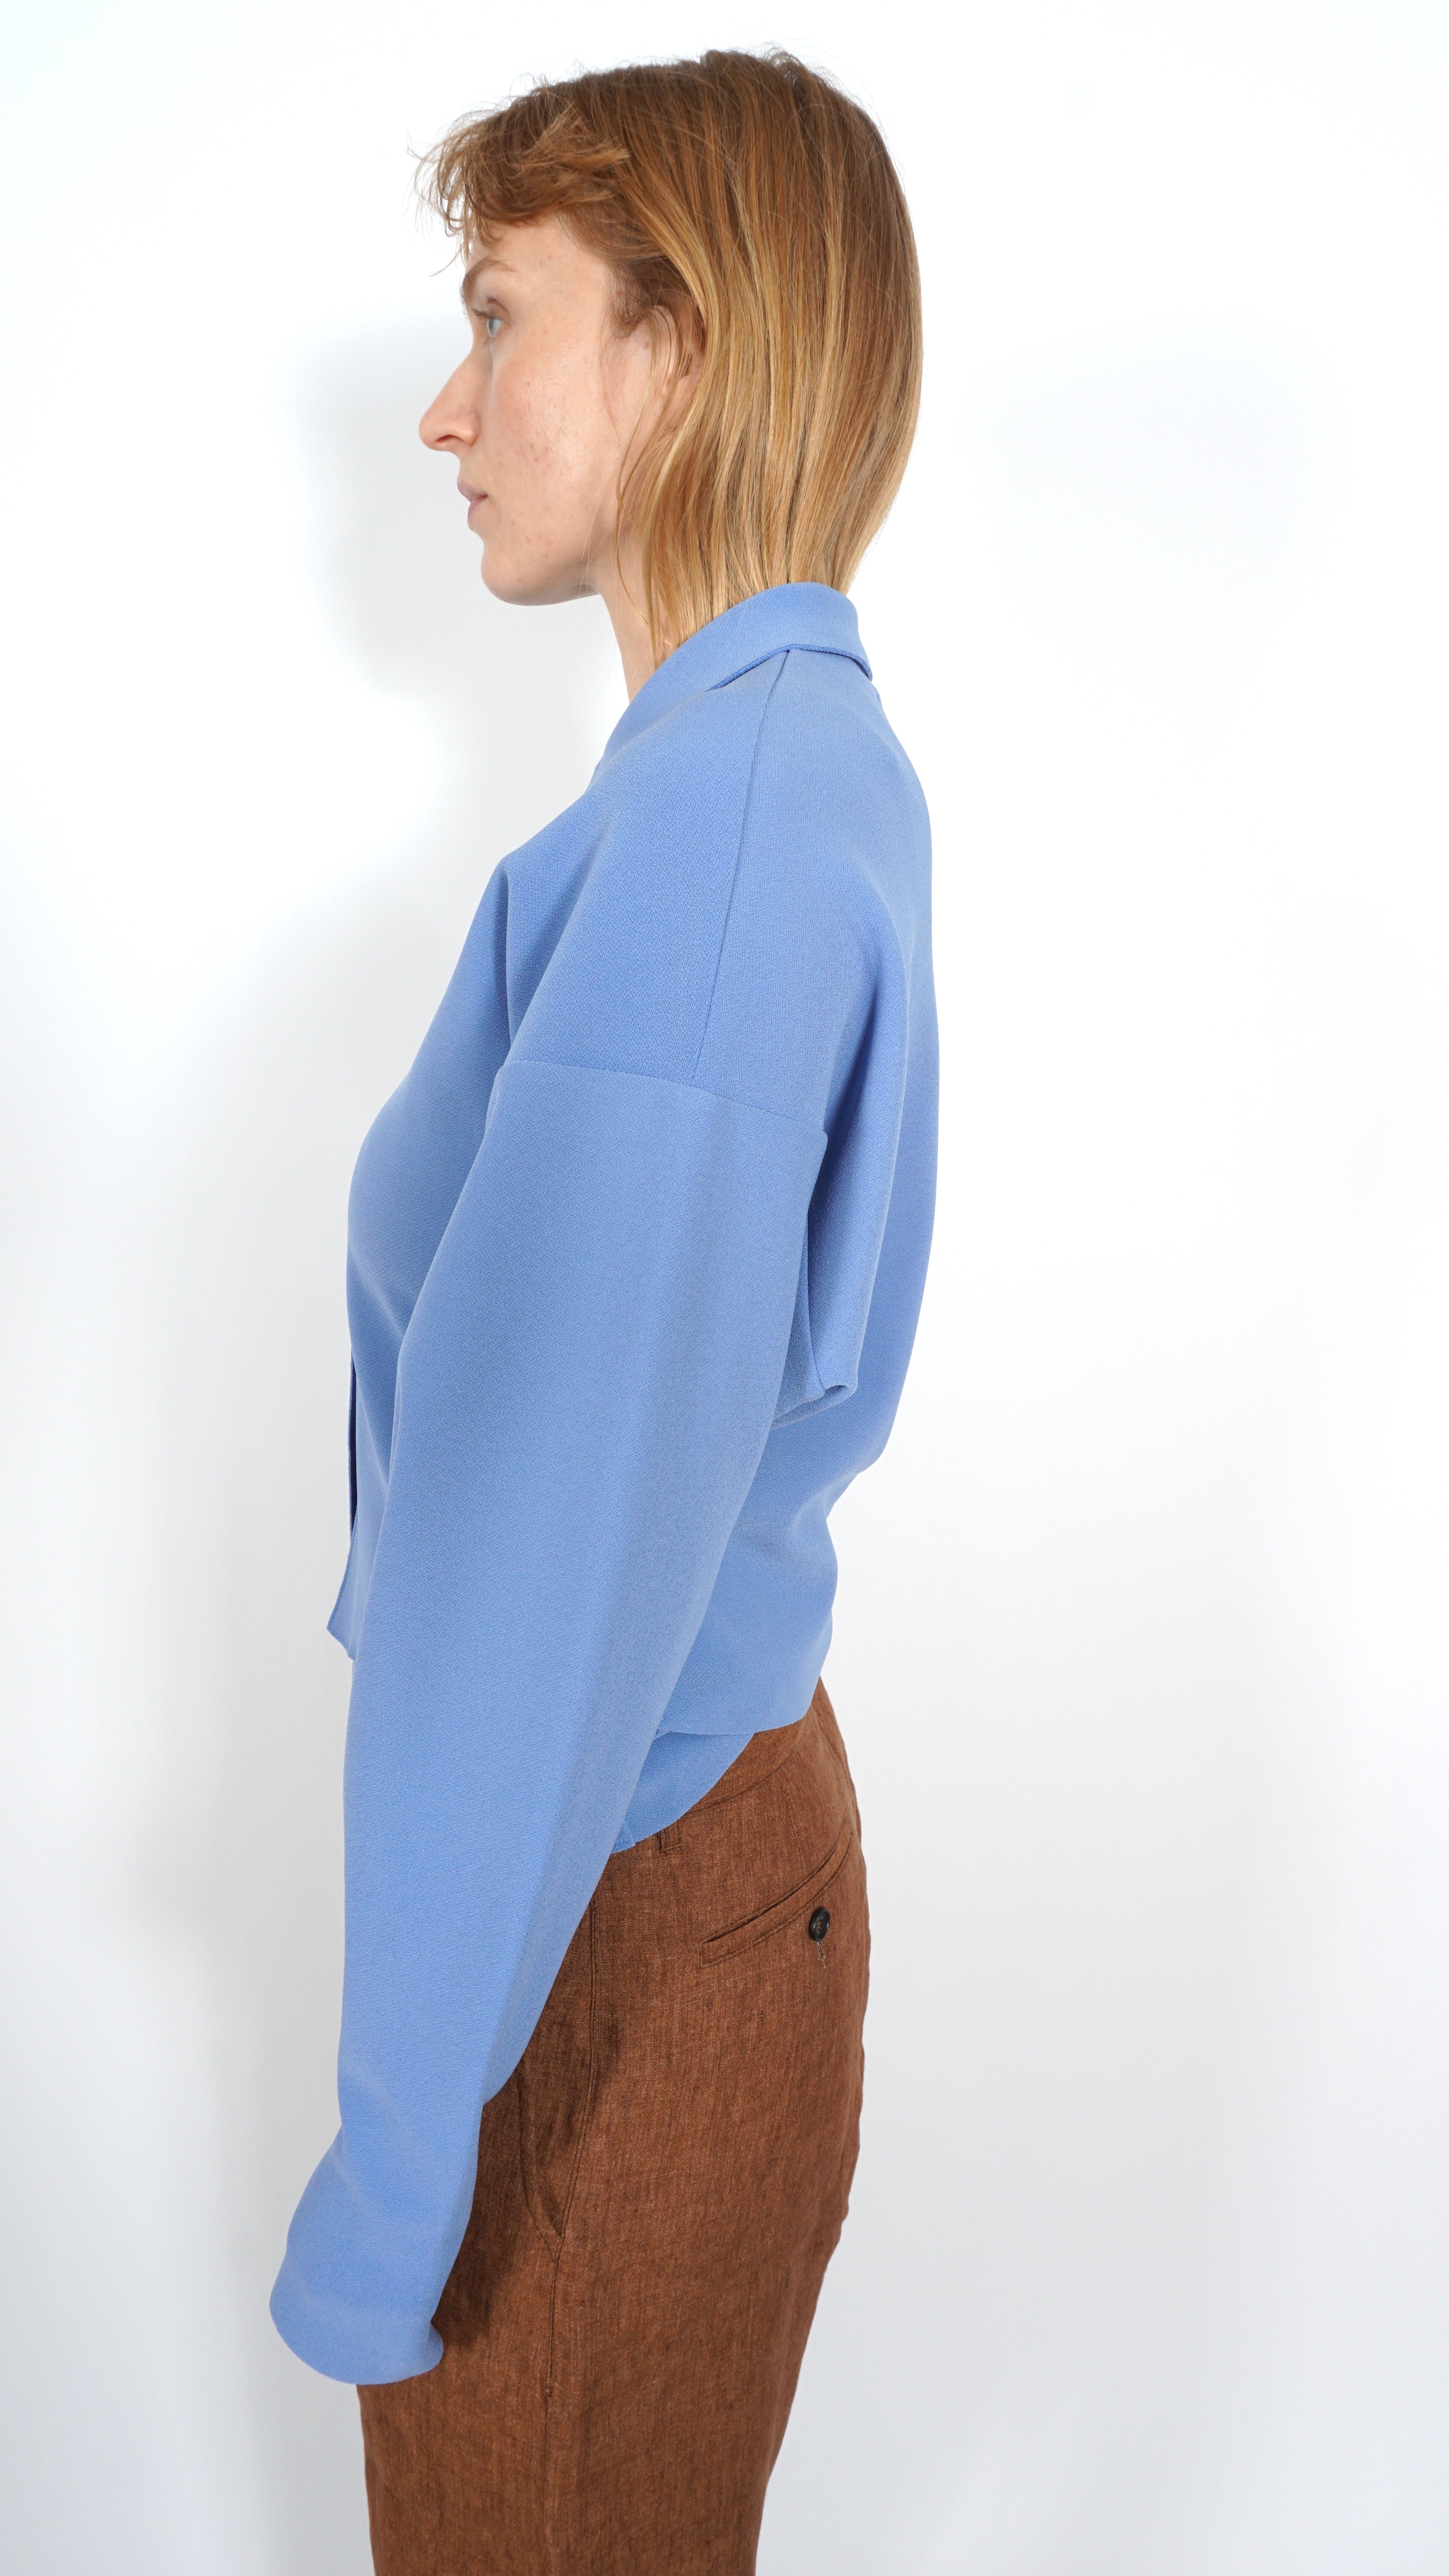 Cropped cardigan by Birrot